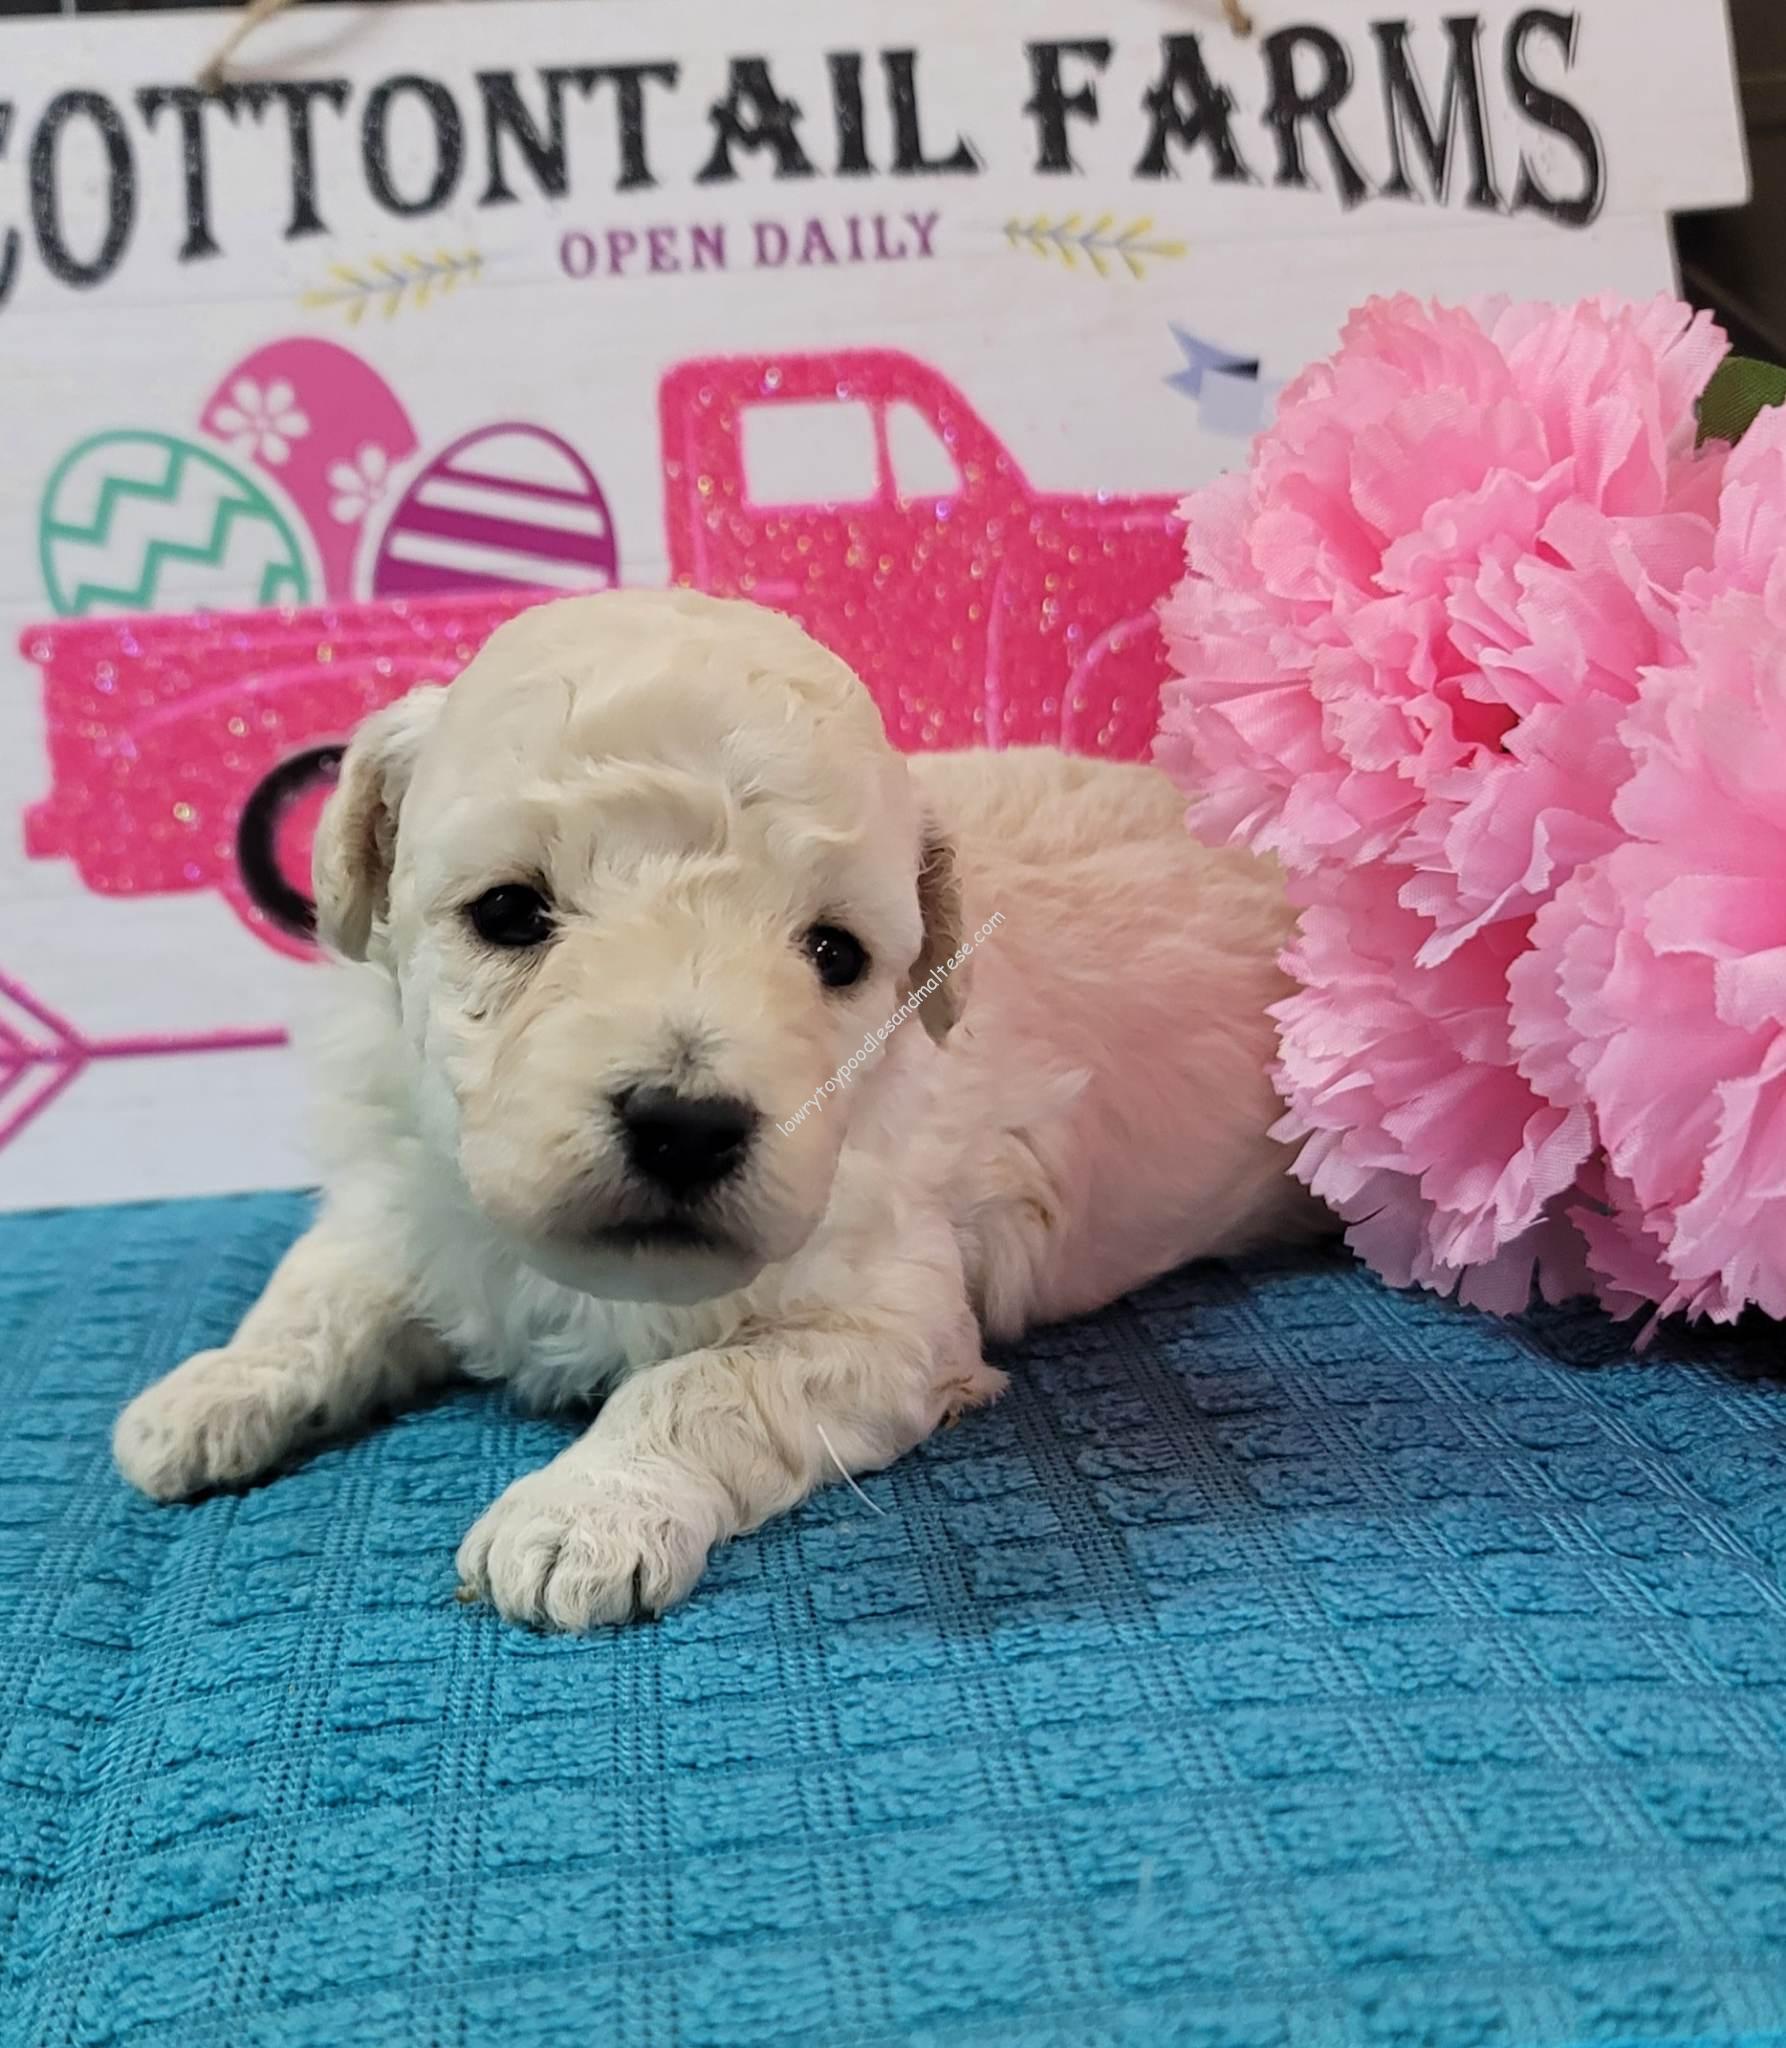 White Toy Poodle Puppies Are Available For Sale!